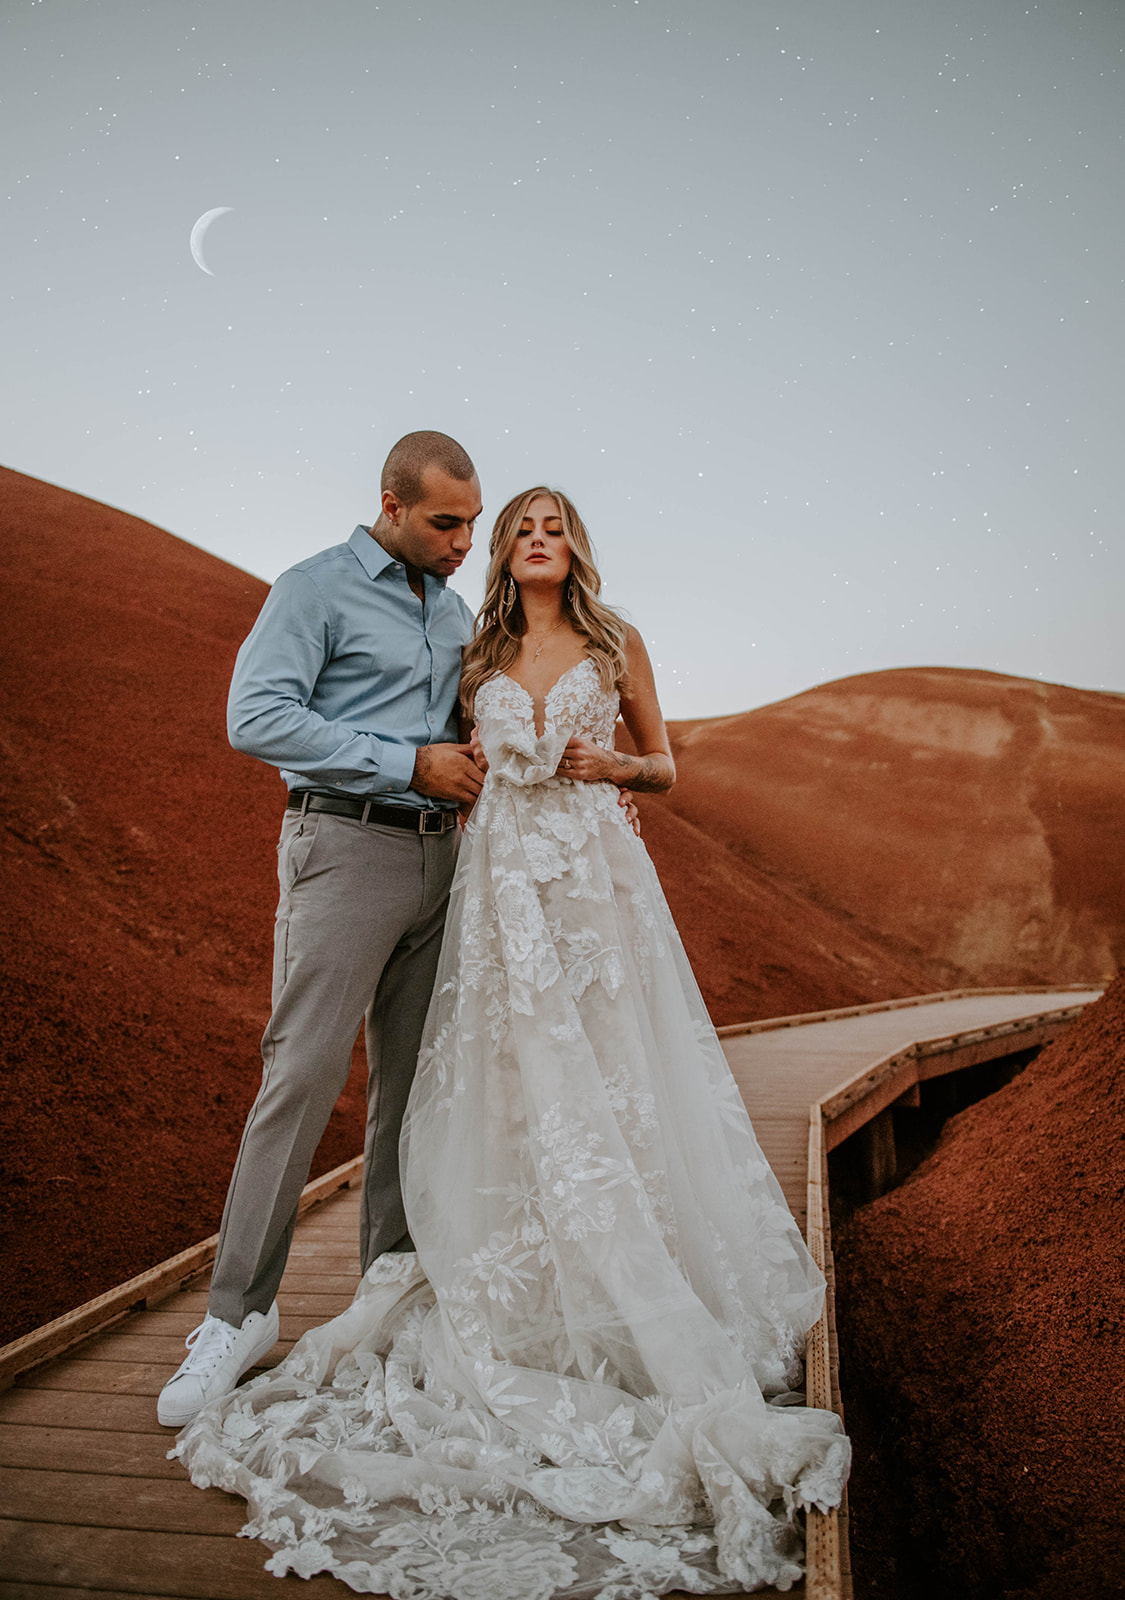 A bride clutching her wedding dress on the bridge at the painted hills with the moon and stars in the sky 